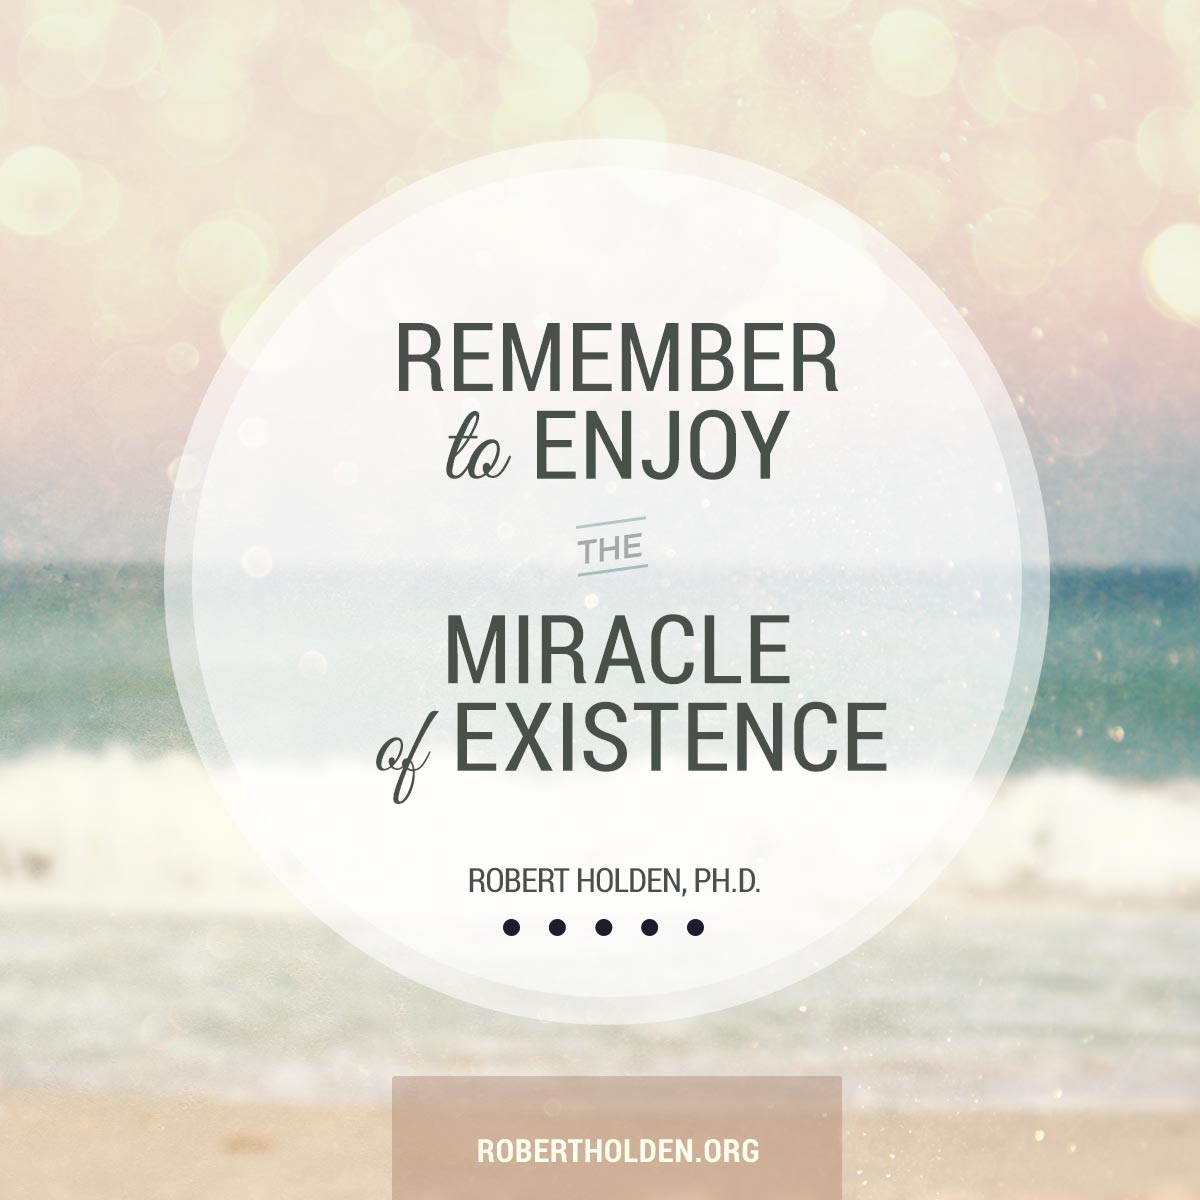 Remember to enjoy the miracle of existence today. Robert Holden